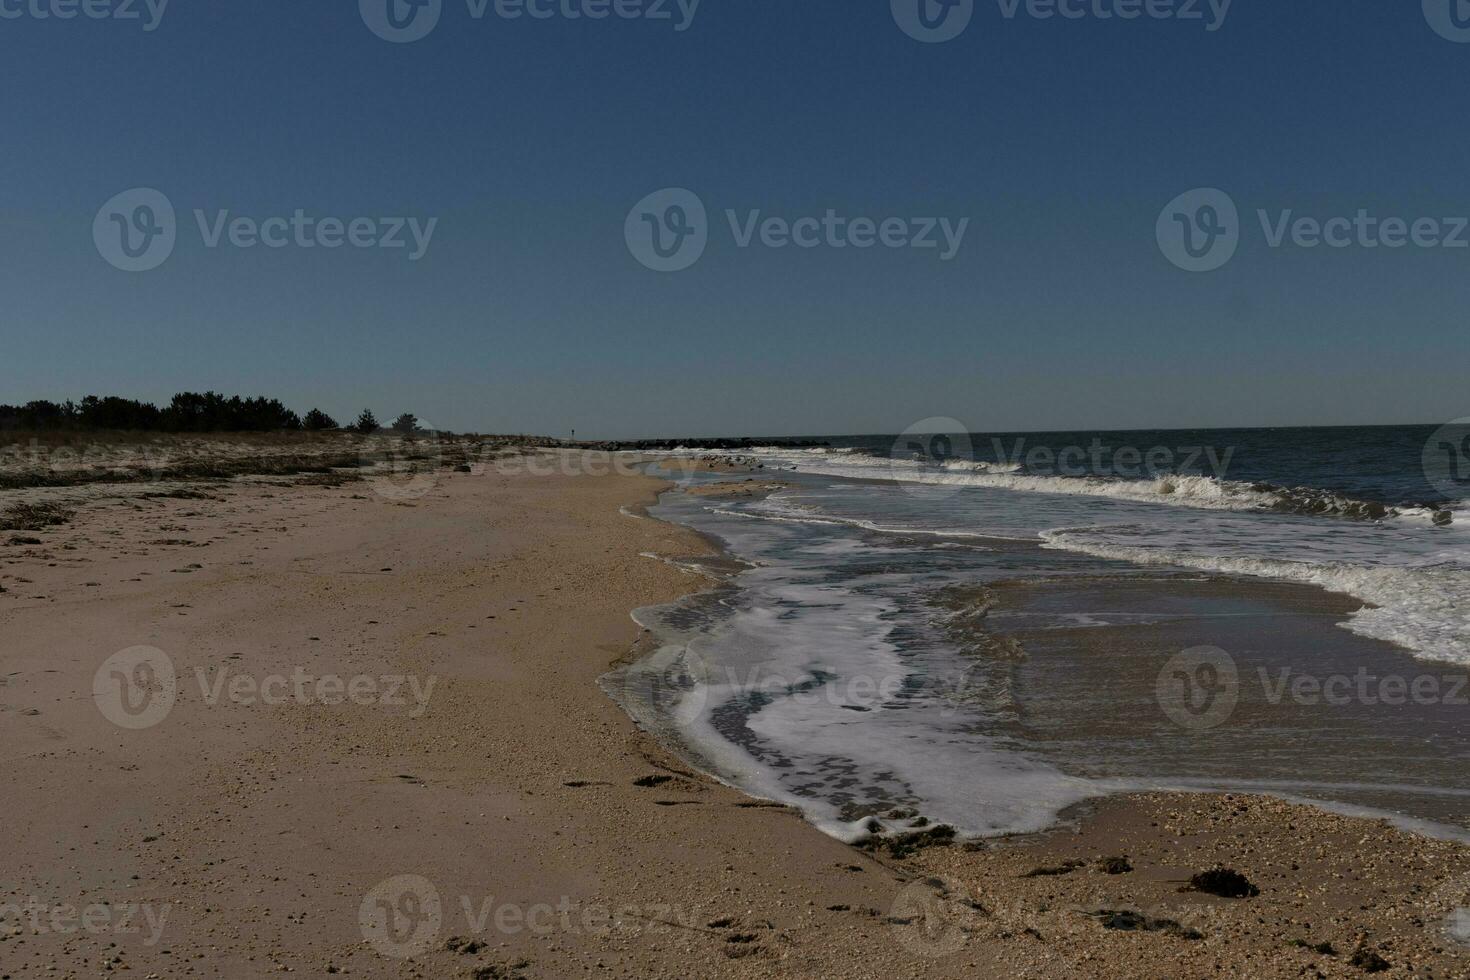 This beautiful image of the surf coming into the beach. The blue ocean with whitecaps on the waves. The water is pummeling the pretty brown sand. The sky is clear with hardly any clouds. photo